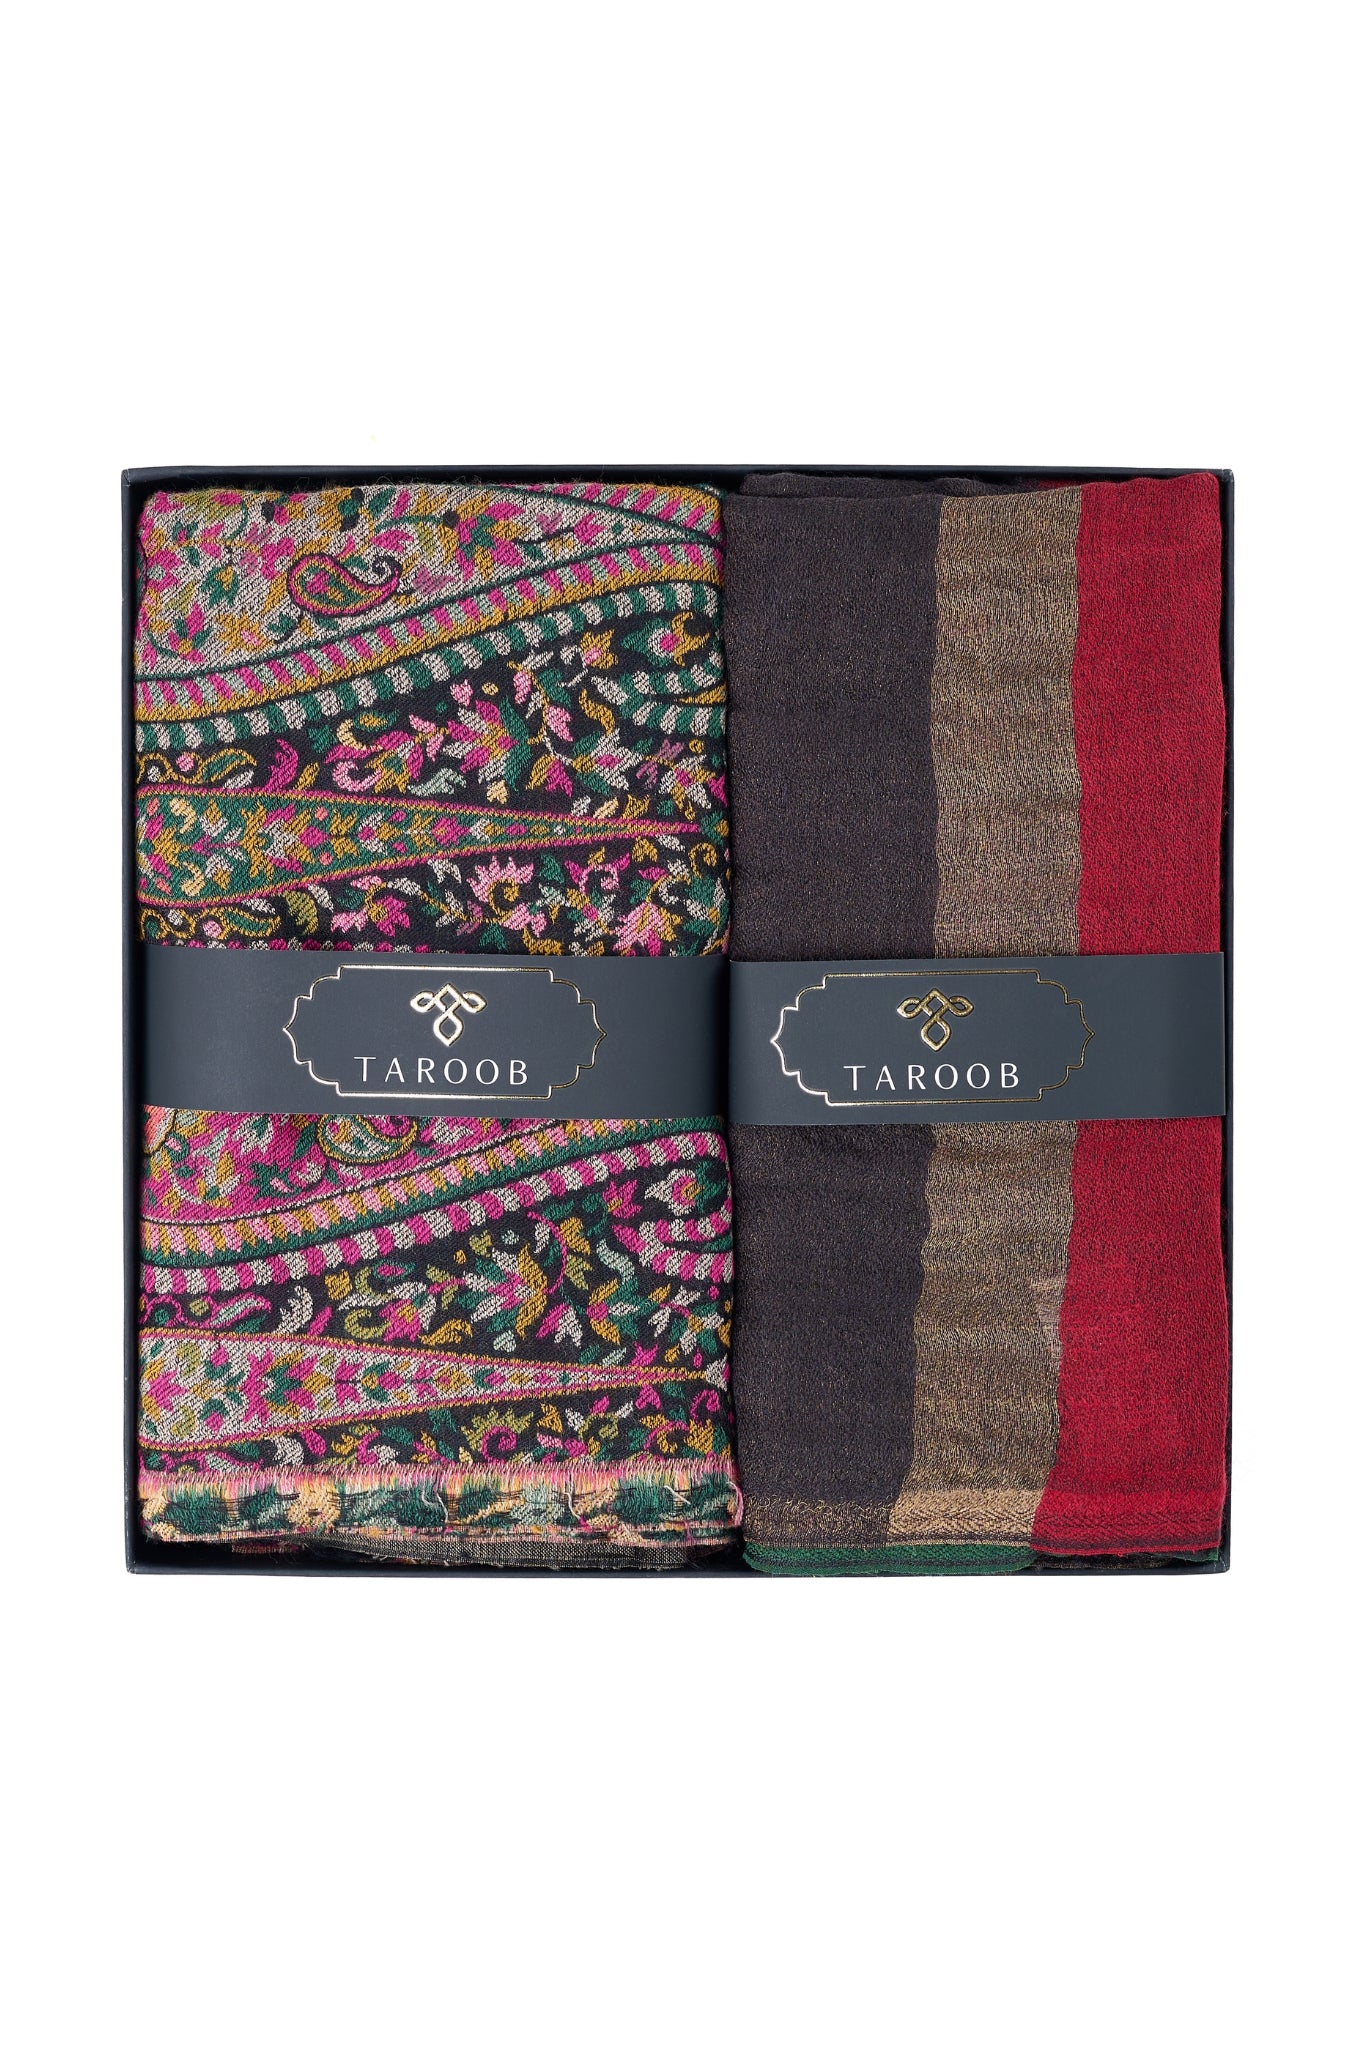 His & Her Gift Set of Men's  Zari Stole and Women's Kaani Shawl